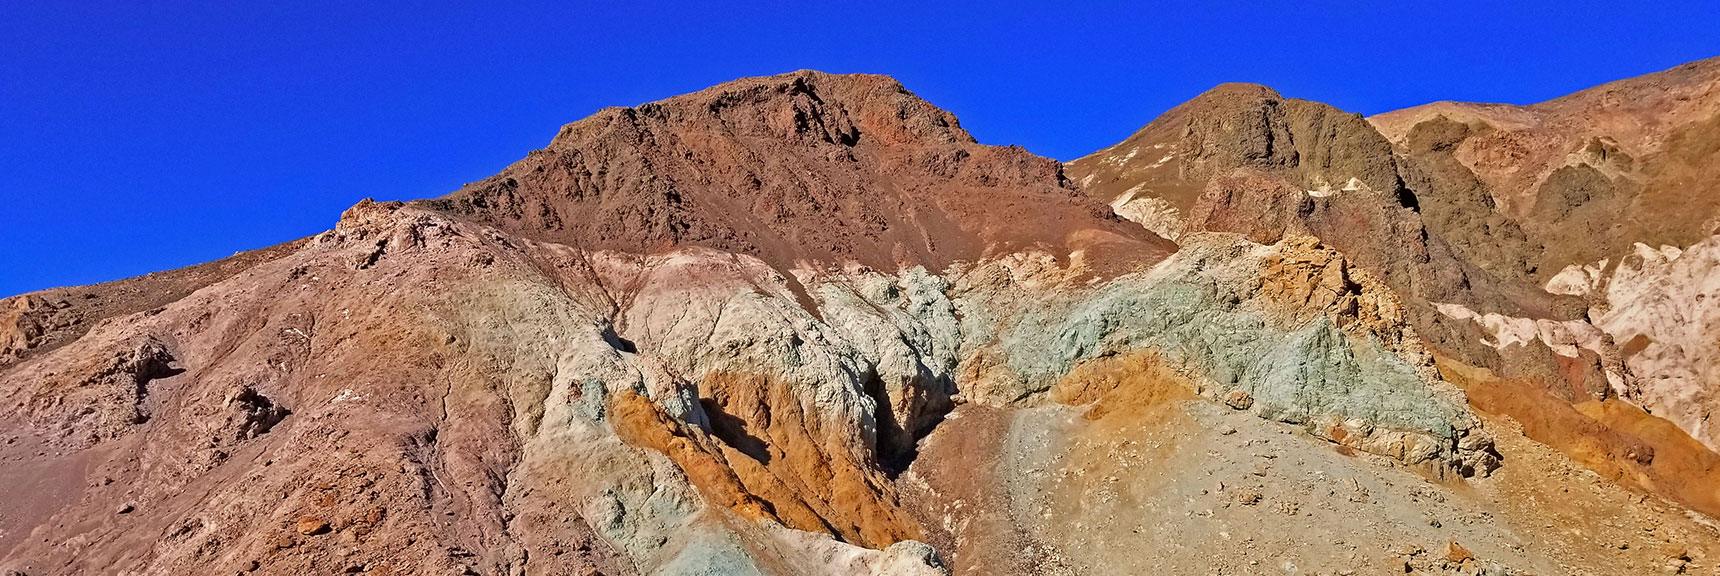 More Colorful Hills on Artist's Pallet: Reds (Iron, Hematite); Whites (Magnesium); Greens (Chlorite) | Artists Drive Hidden Canyon Hikes | Death Valley National Park, California